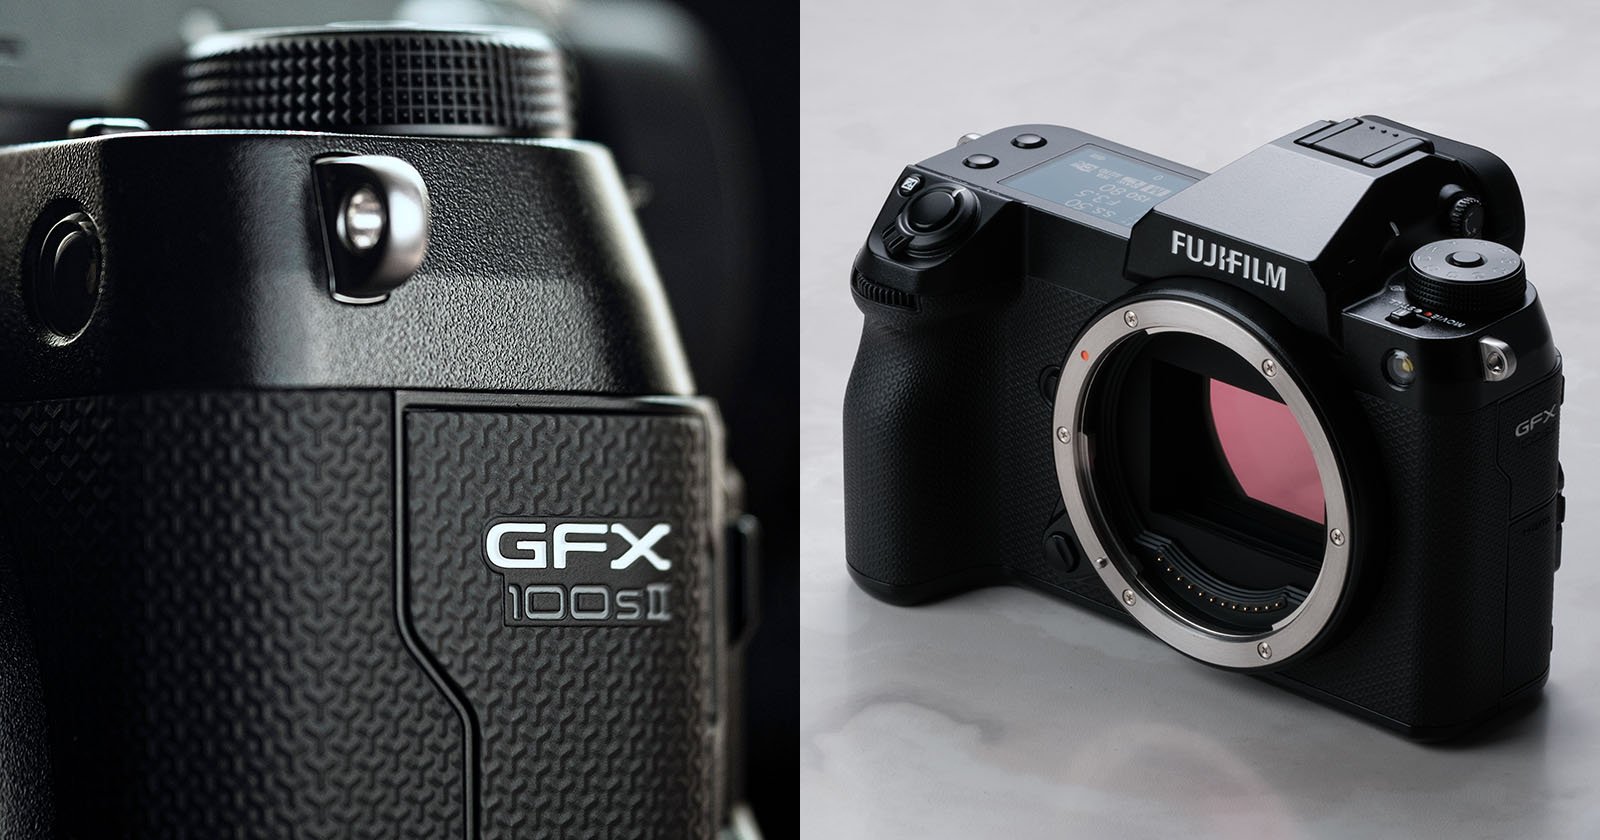 If You Care About Image Quality Most, Good Luck Finding a Better Camera Than the GFX 100S II